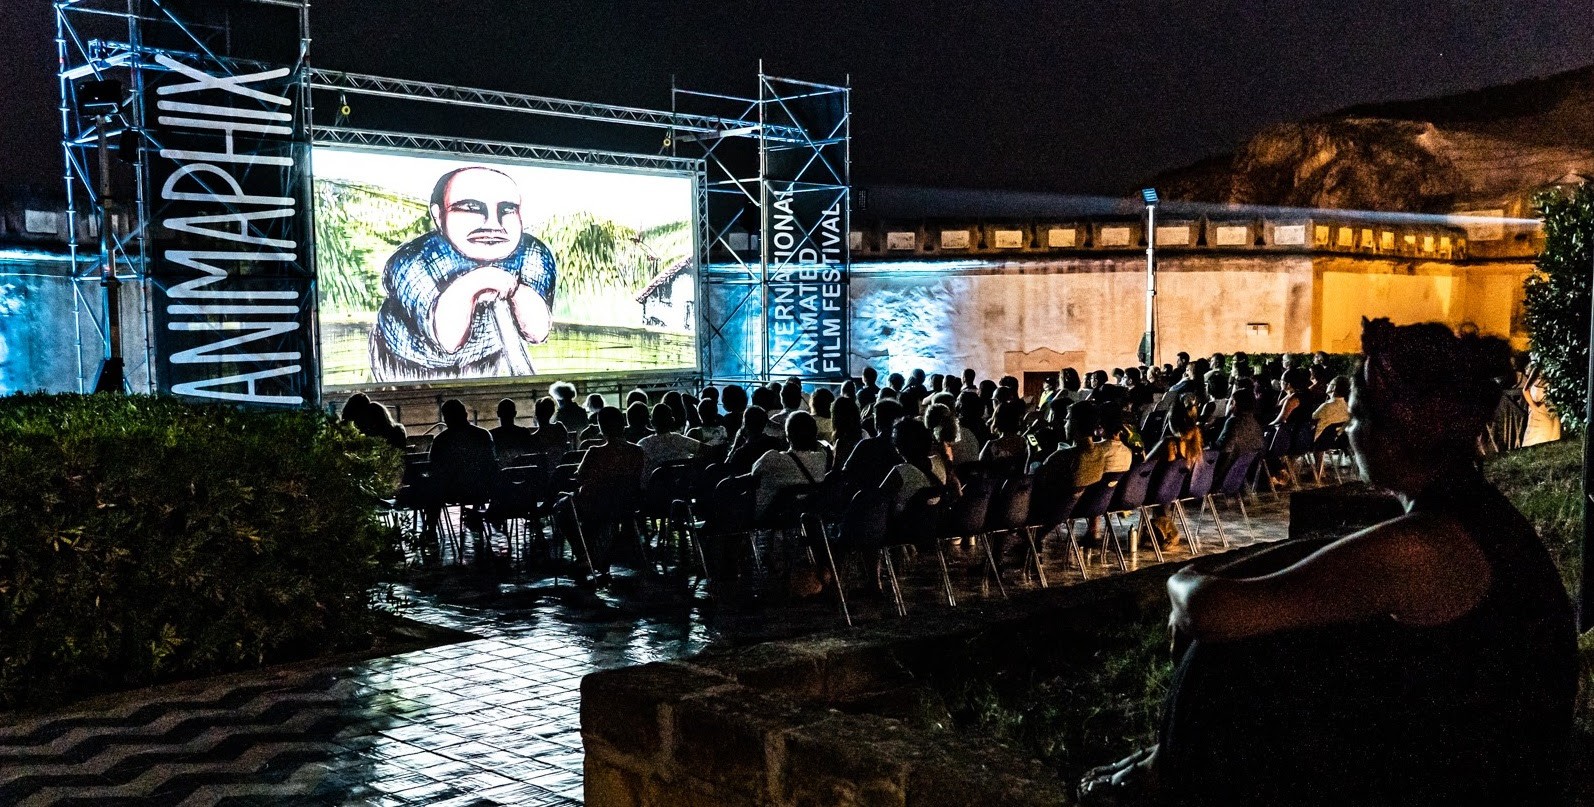 Animaphix - International Animated Film Festival is back, with its eighth edition it will bring authorial animation to Sicily